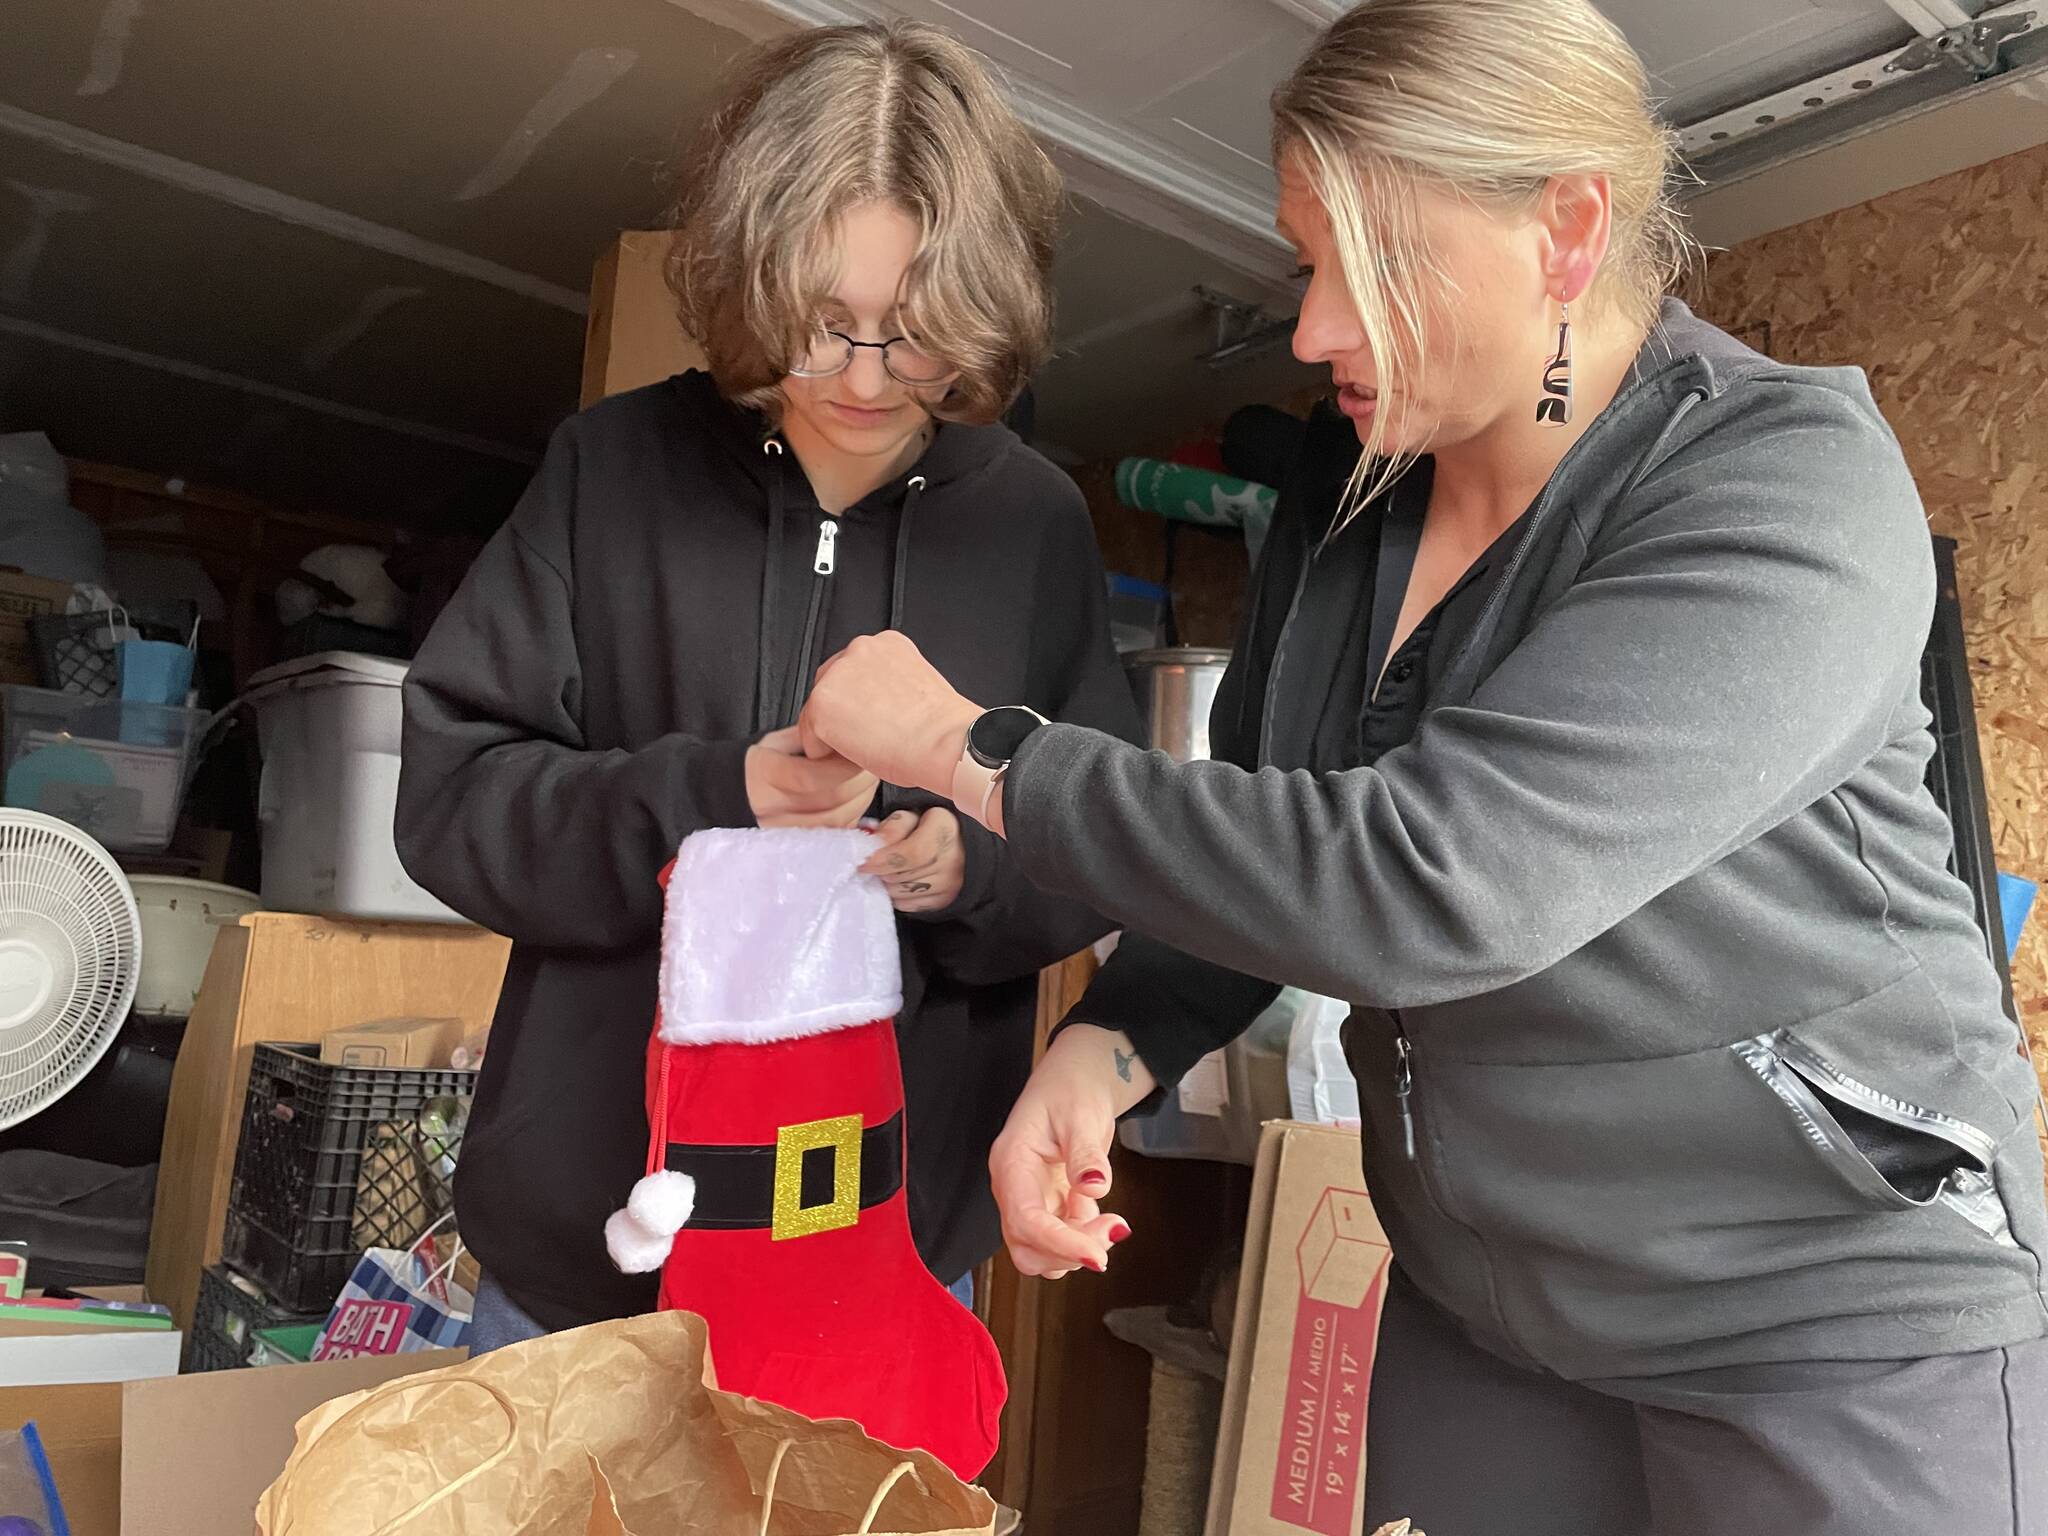 Sequim Gazette photo by Matthew Nash/ River Jensen, left, and her mom Anna Larsen say donations of toiletries are down this year for River’s Christmas Project to supply stockings with toiletries, gloves, winter hats and more. They plan to supply the stockings to local agencies prior to Christmas.